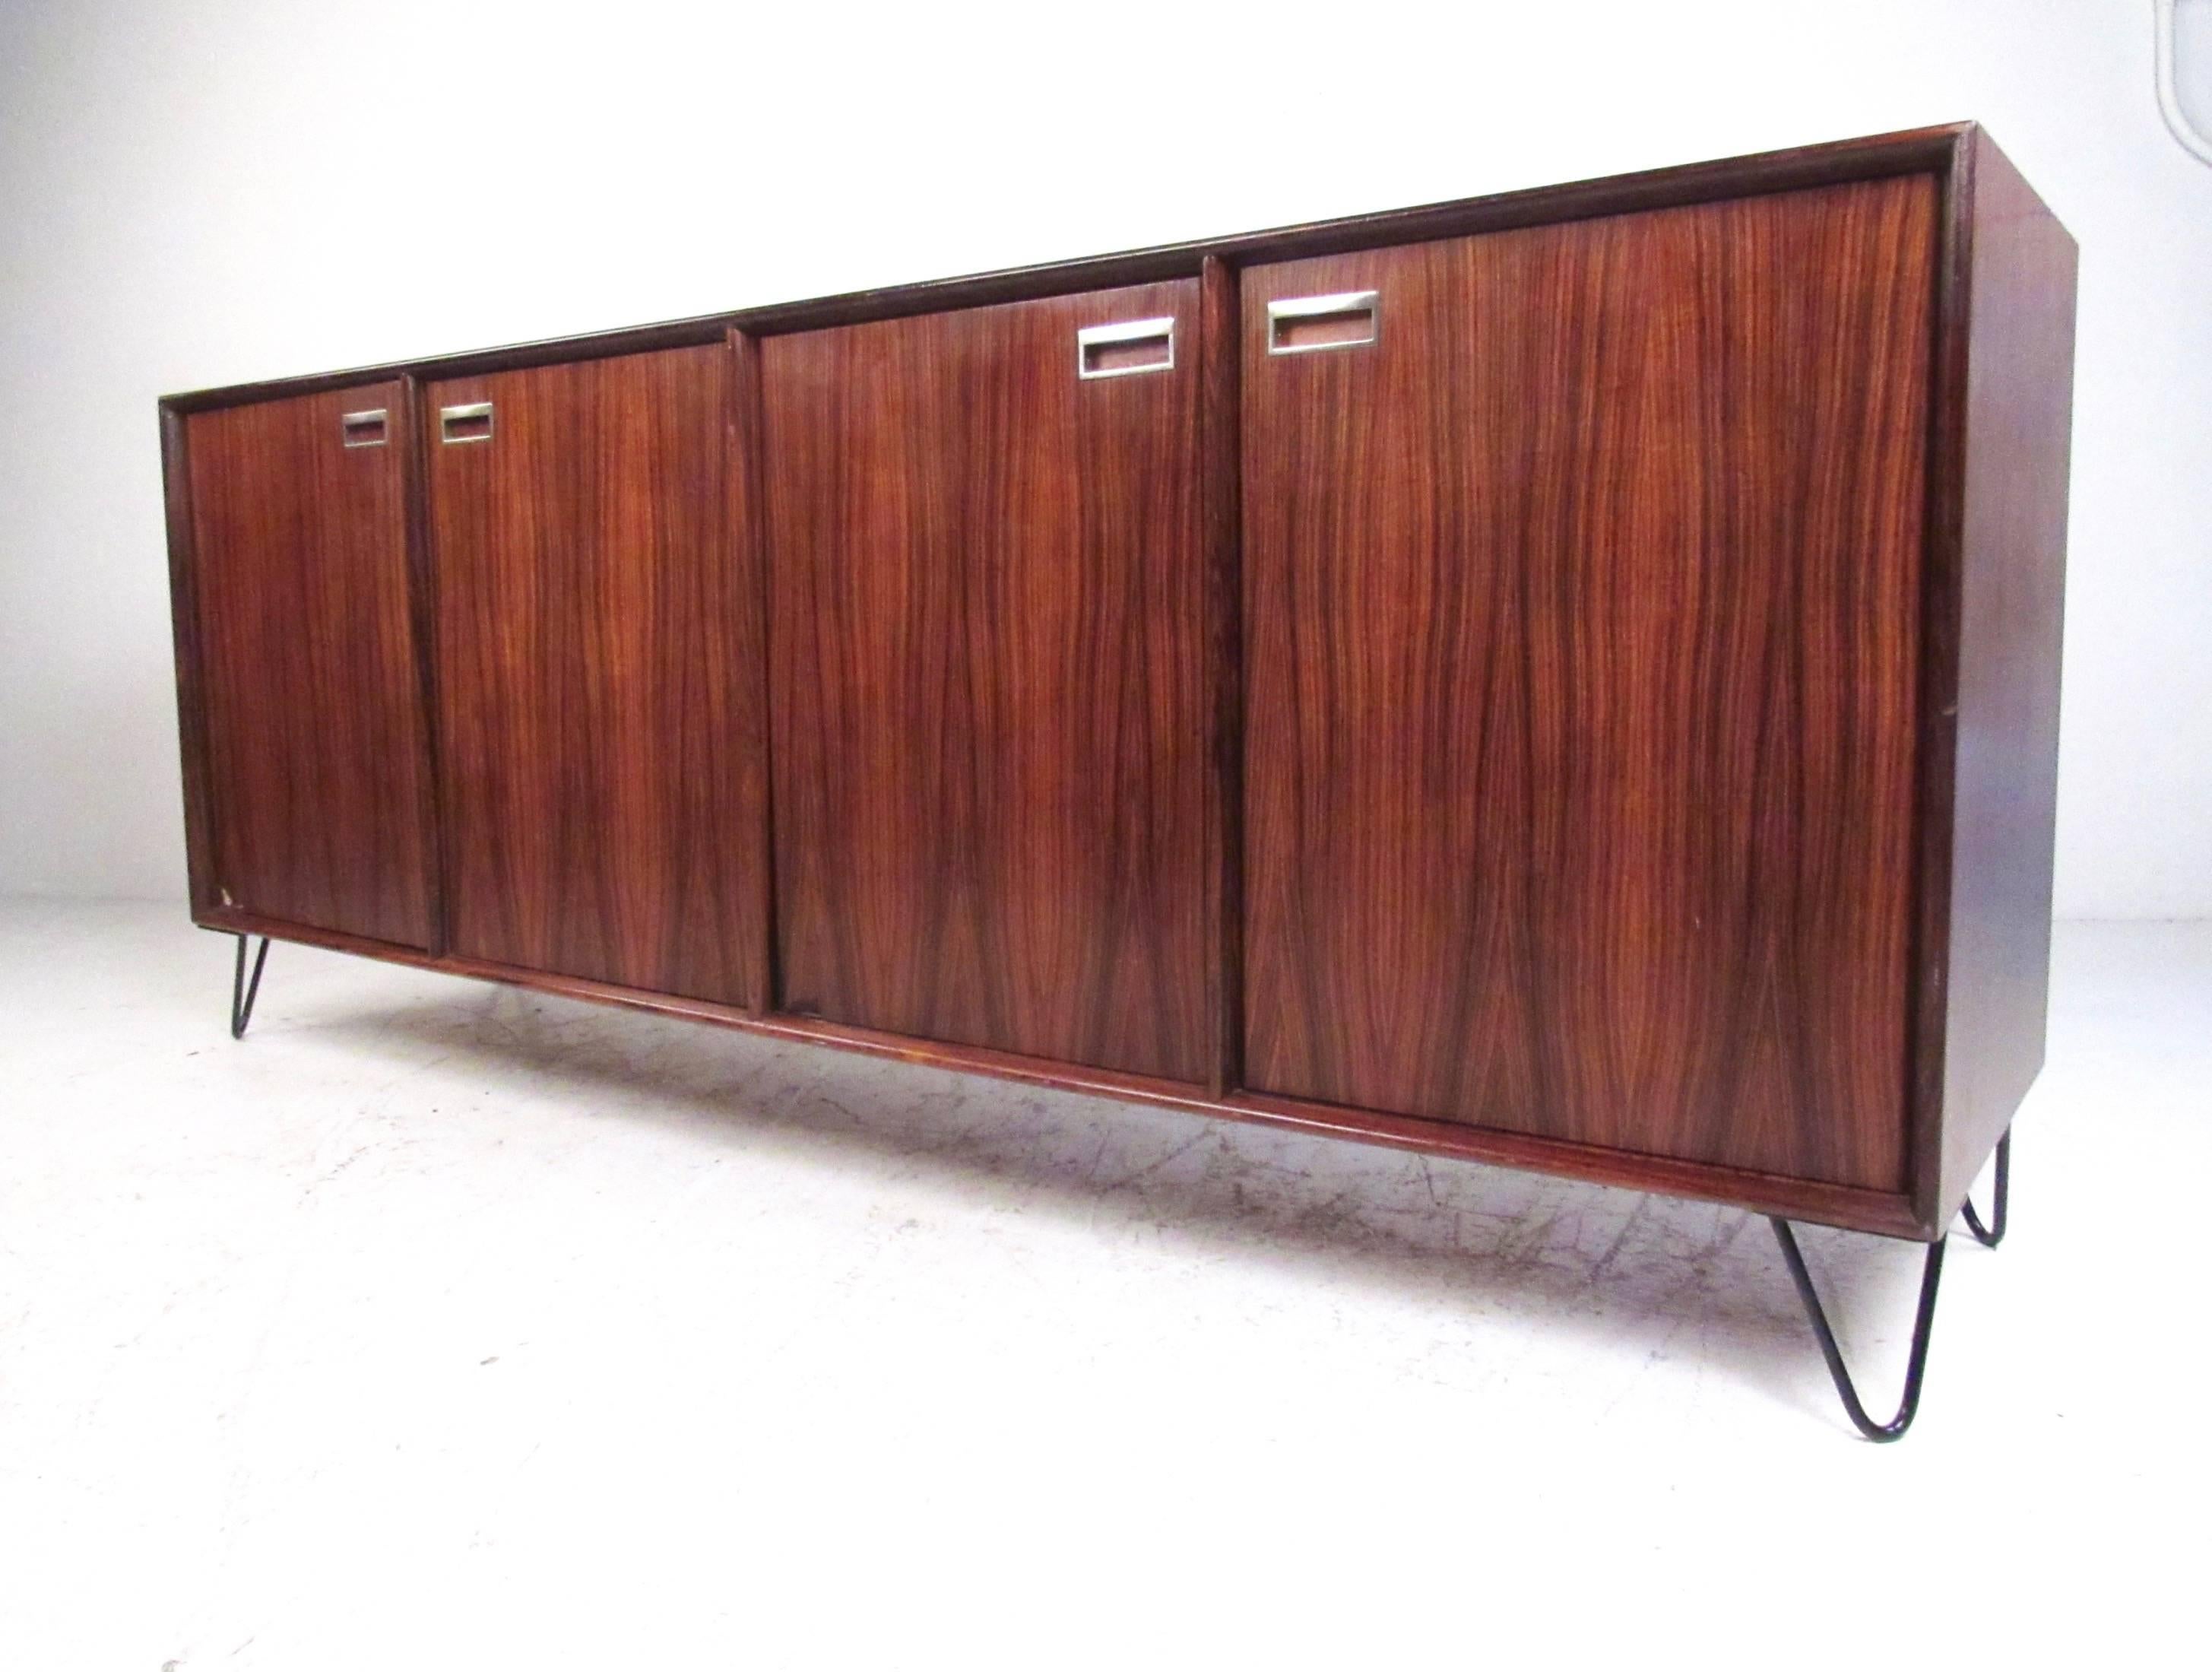 This stylish vintage sideboard features Scandinavian Modern style, impressive rosewood veneer, and spacious interior cabinets. Ideal for dining room storage or office use, this Mid-Century Modern piece boasts hairpin legs and carved wood pulls.